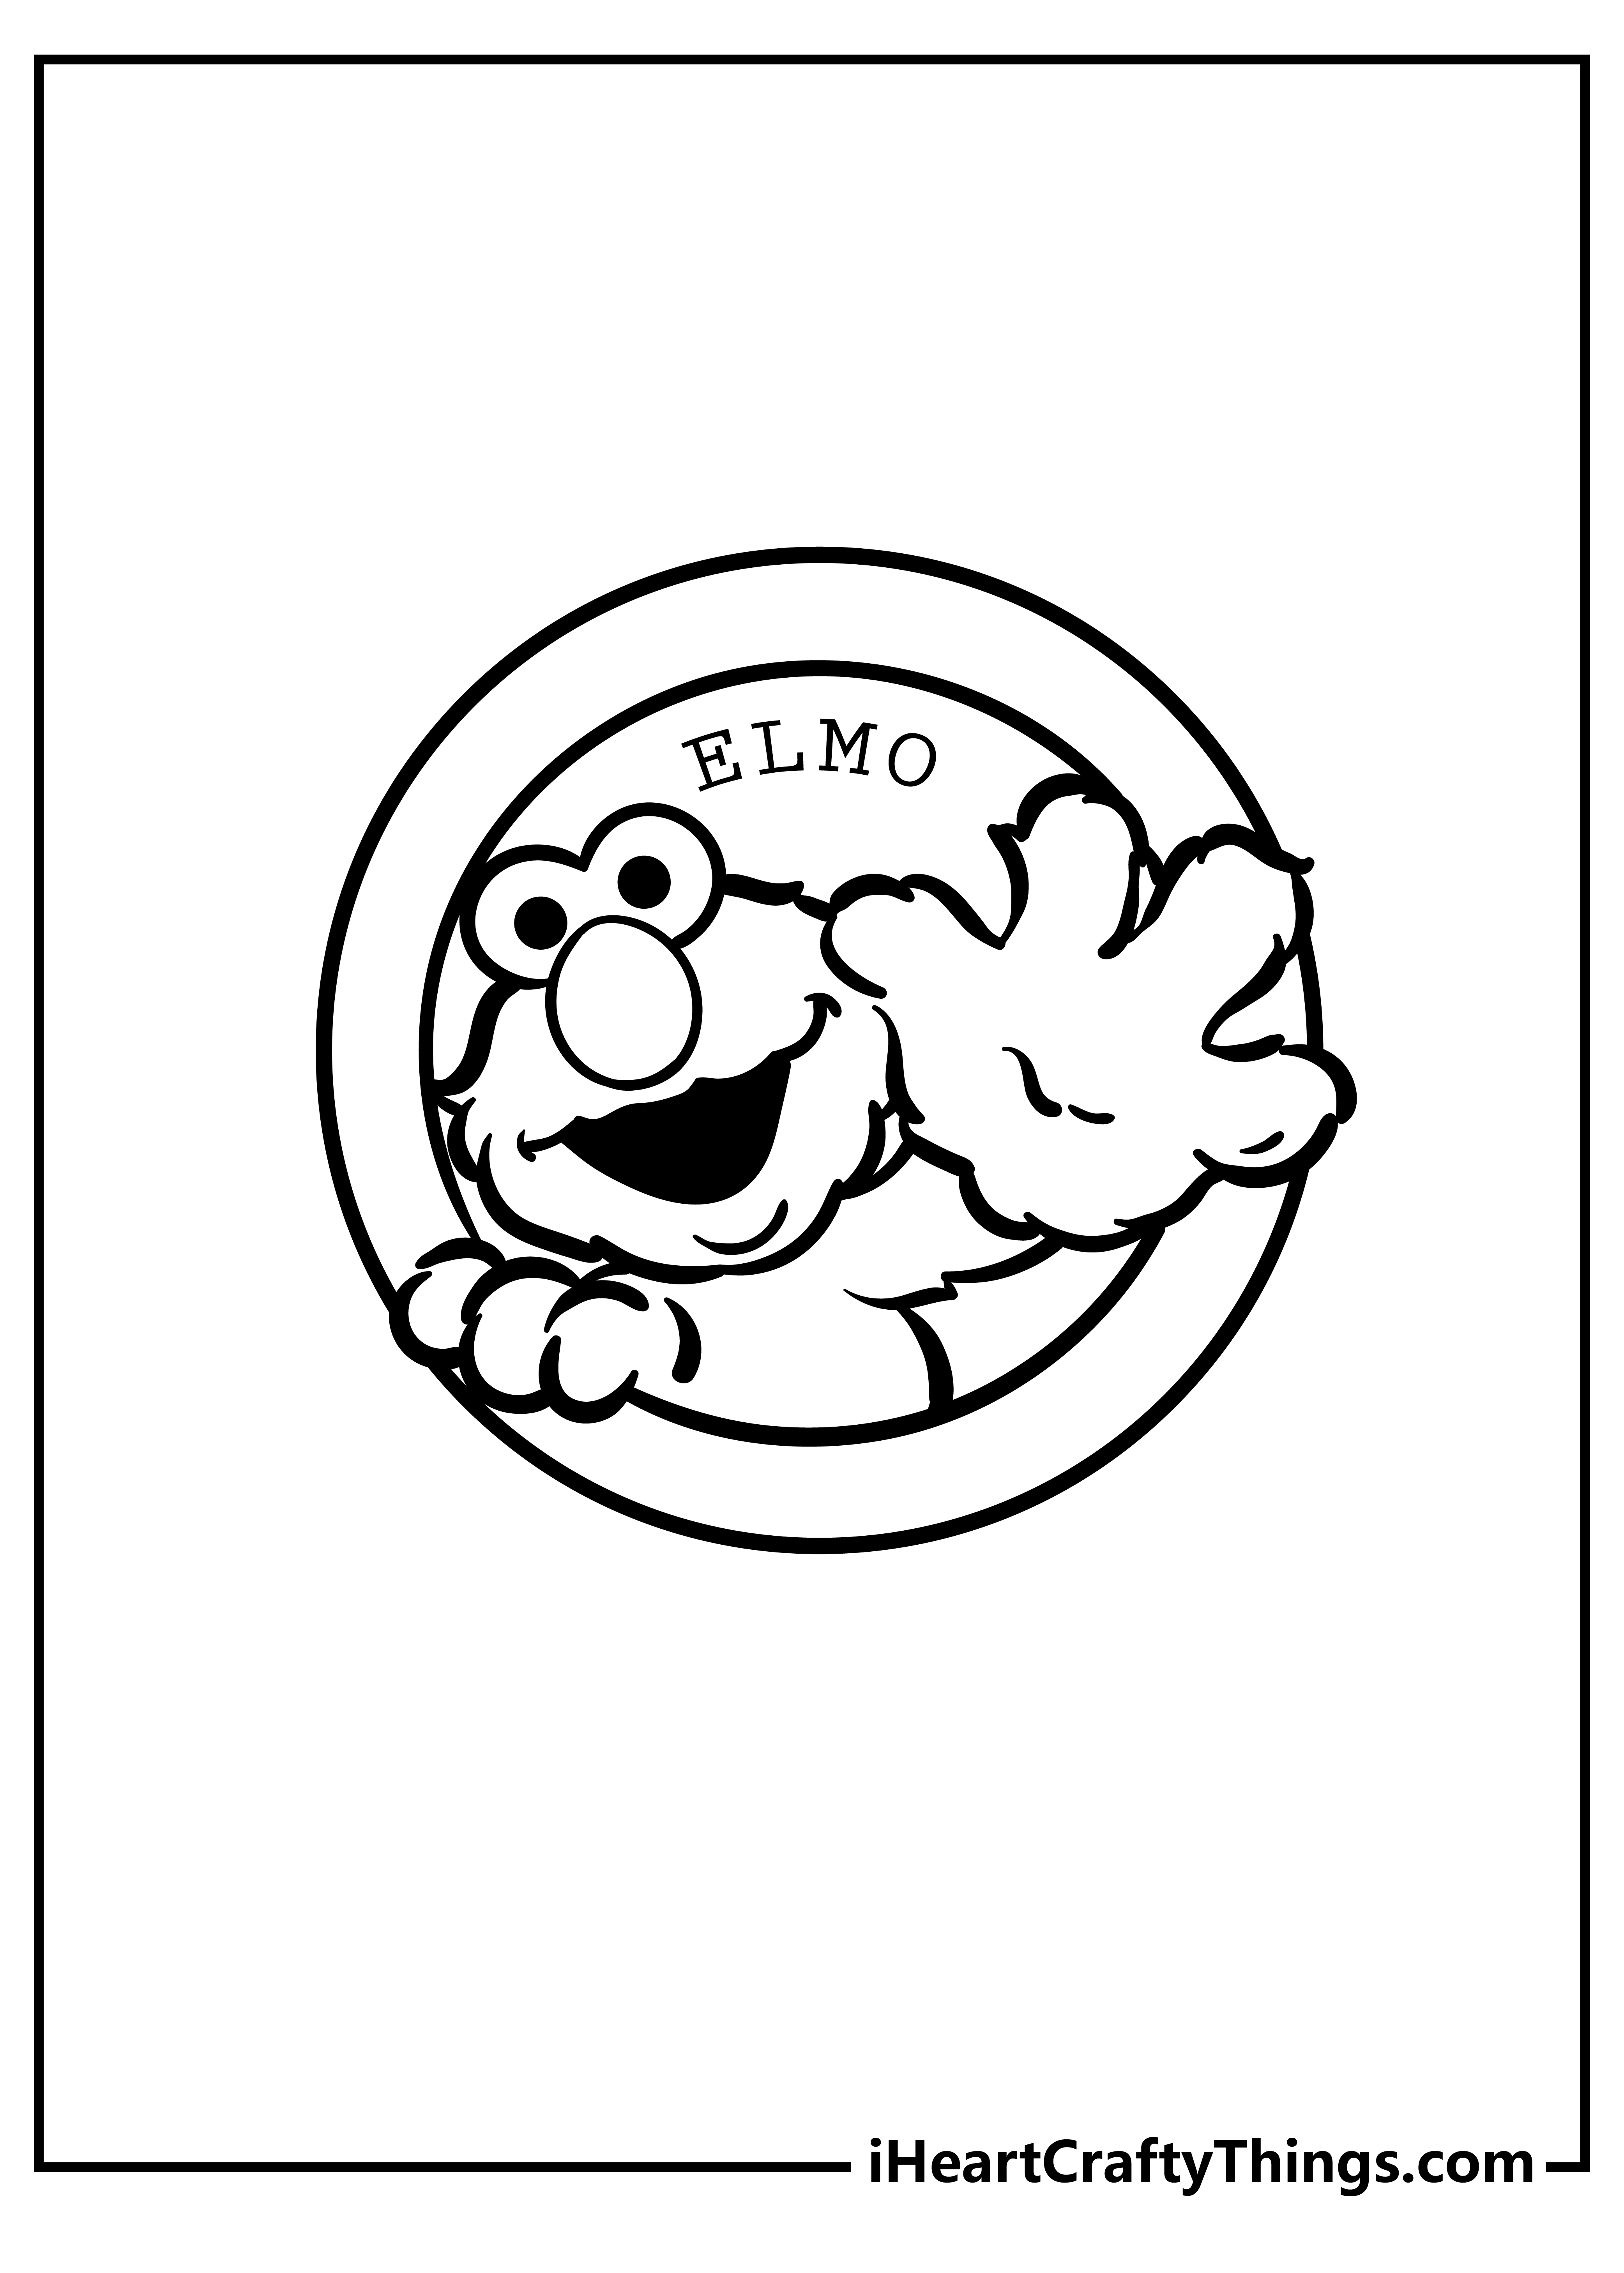 Elmo Coloring Book for kids free printable